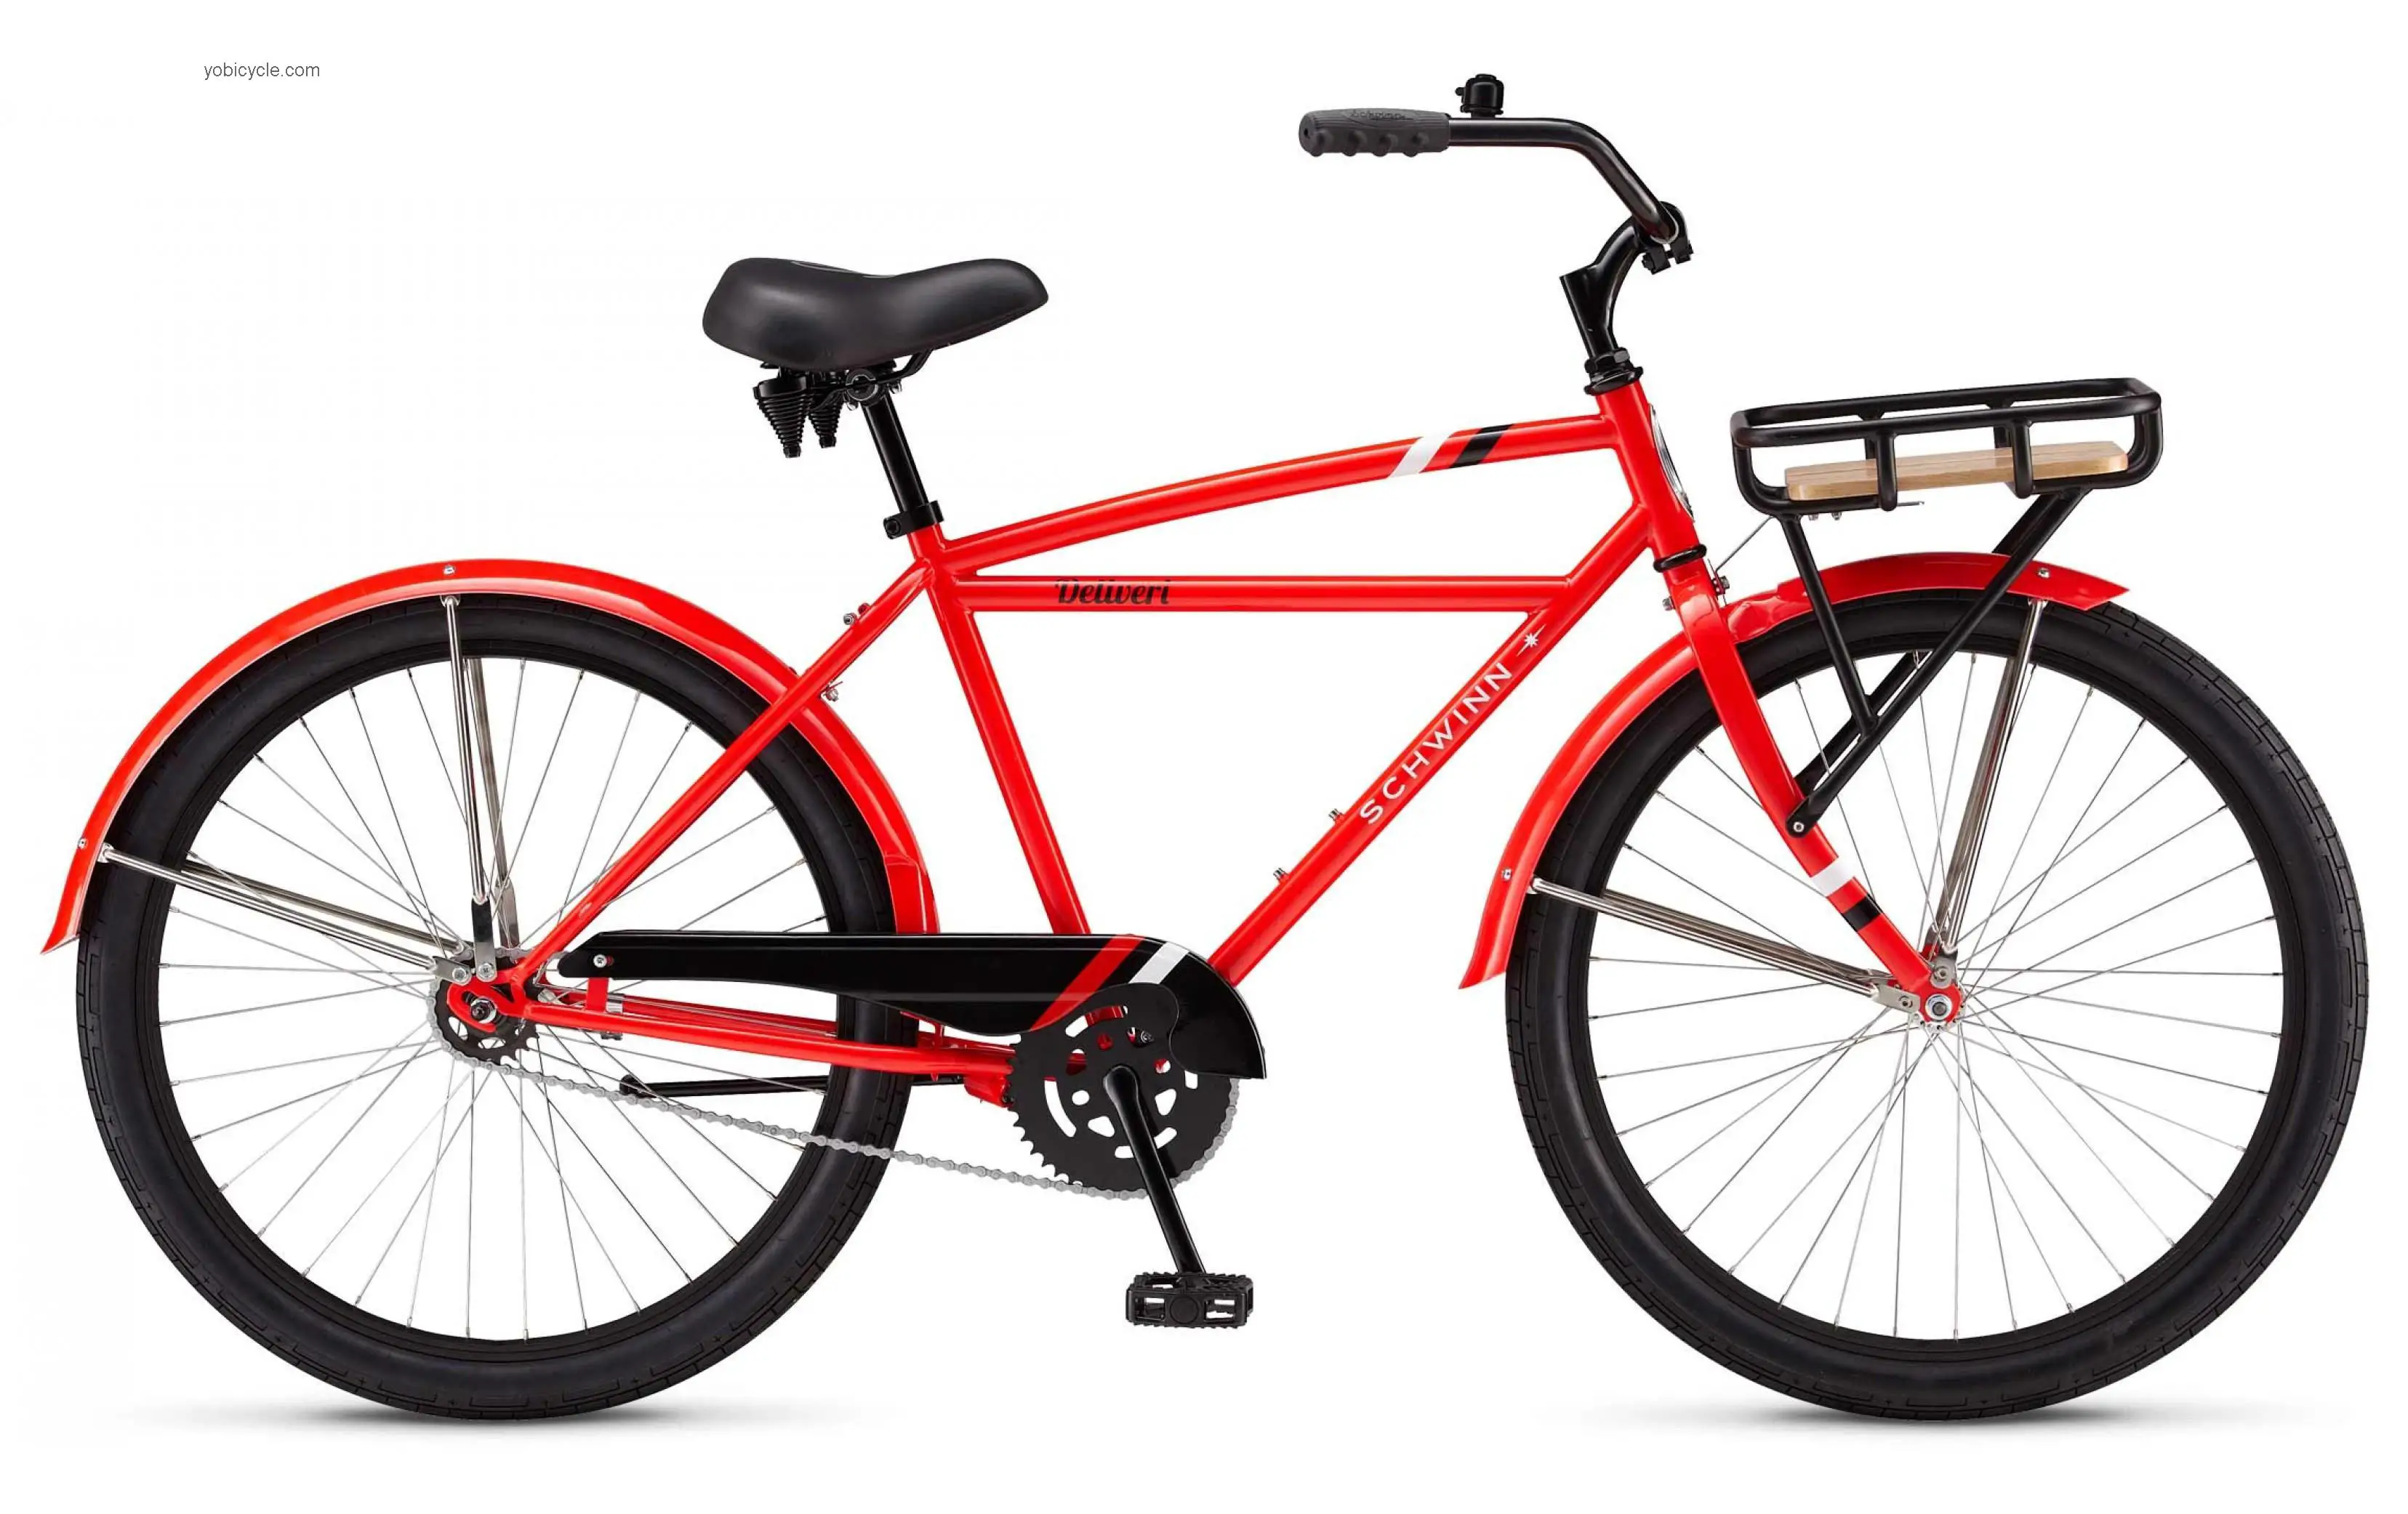 Schwinn Deliveri competitors and comparison tool online specs and performance